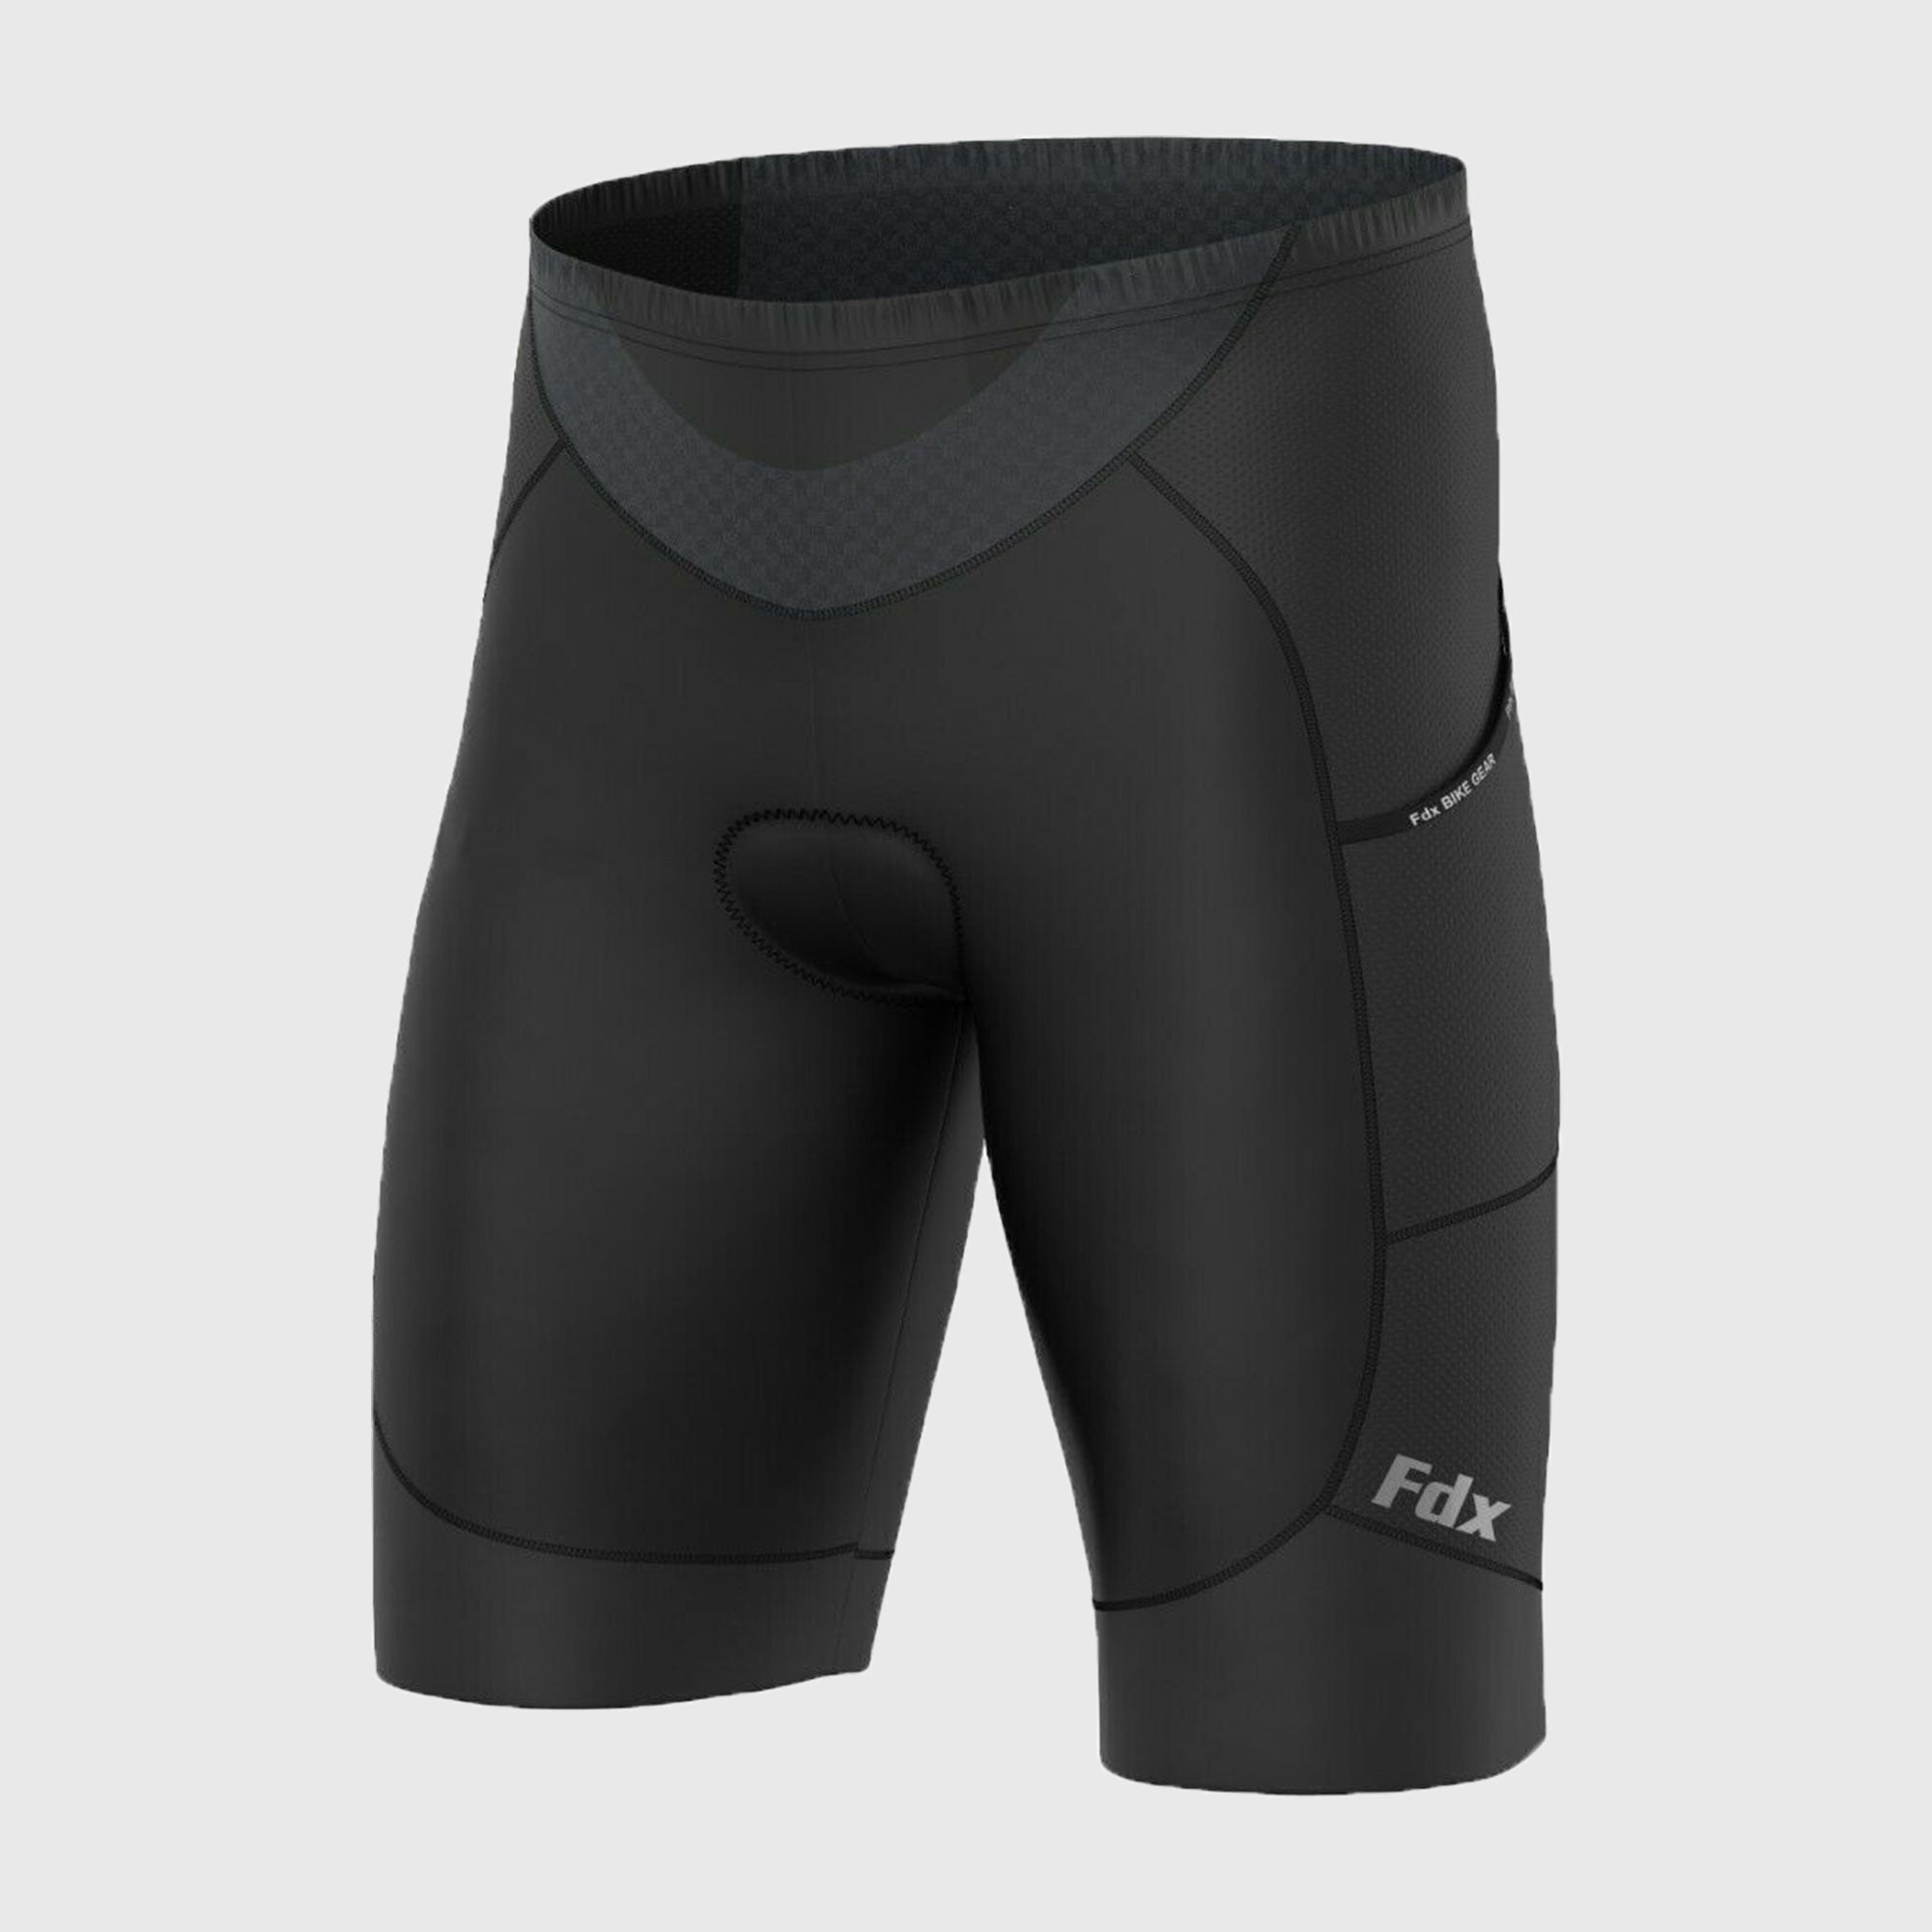 Related: white/black Men 3 Cycling Shorts